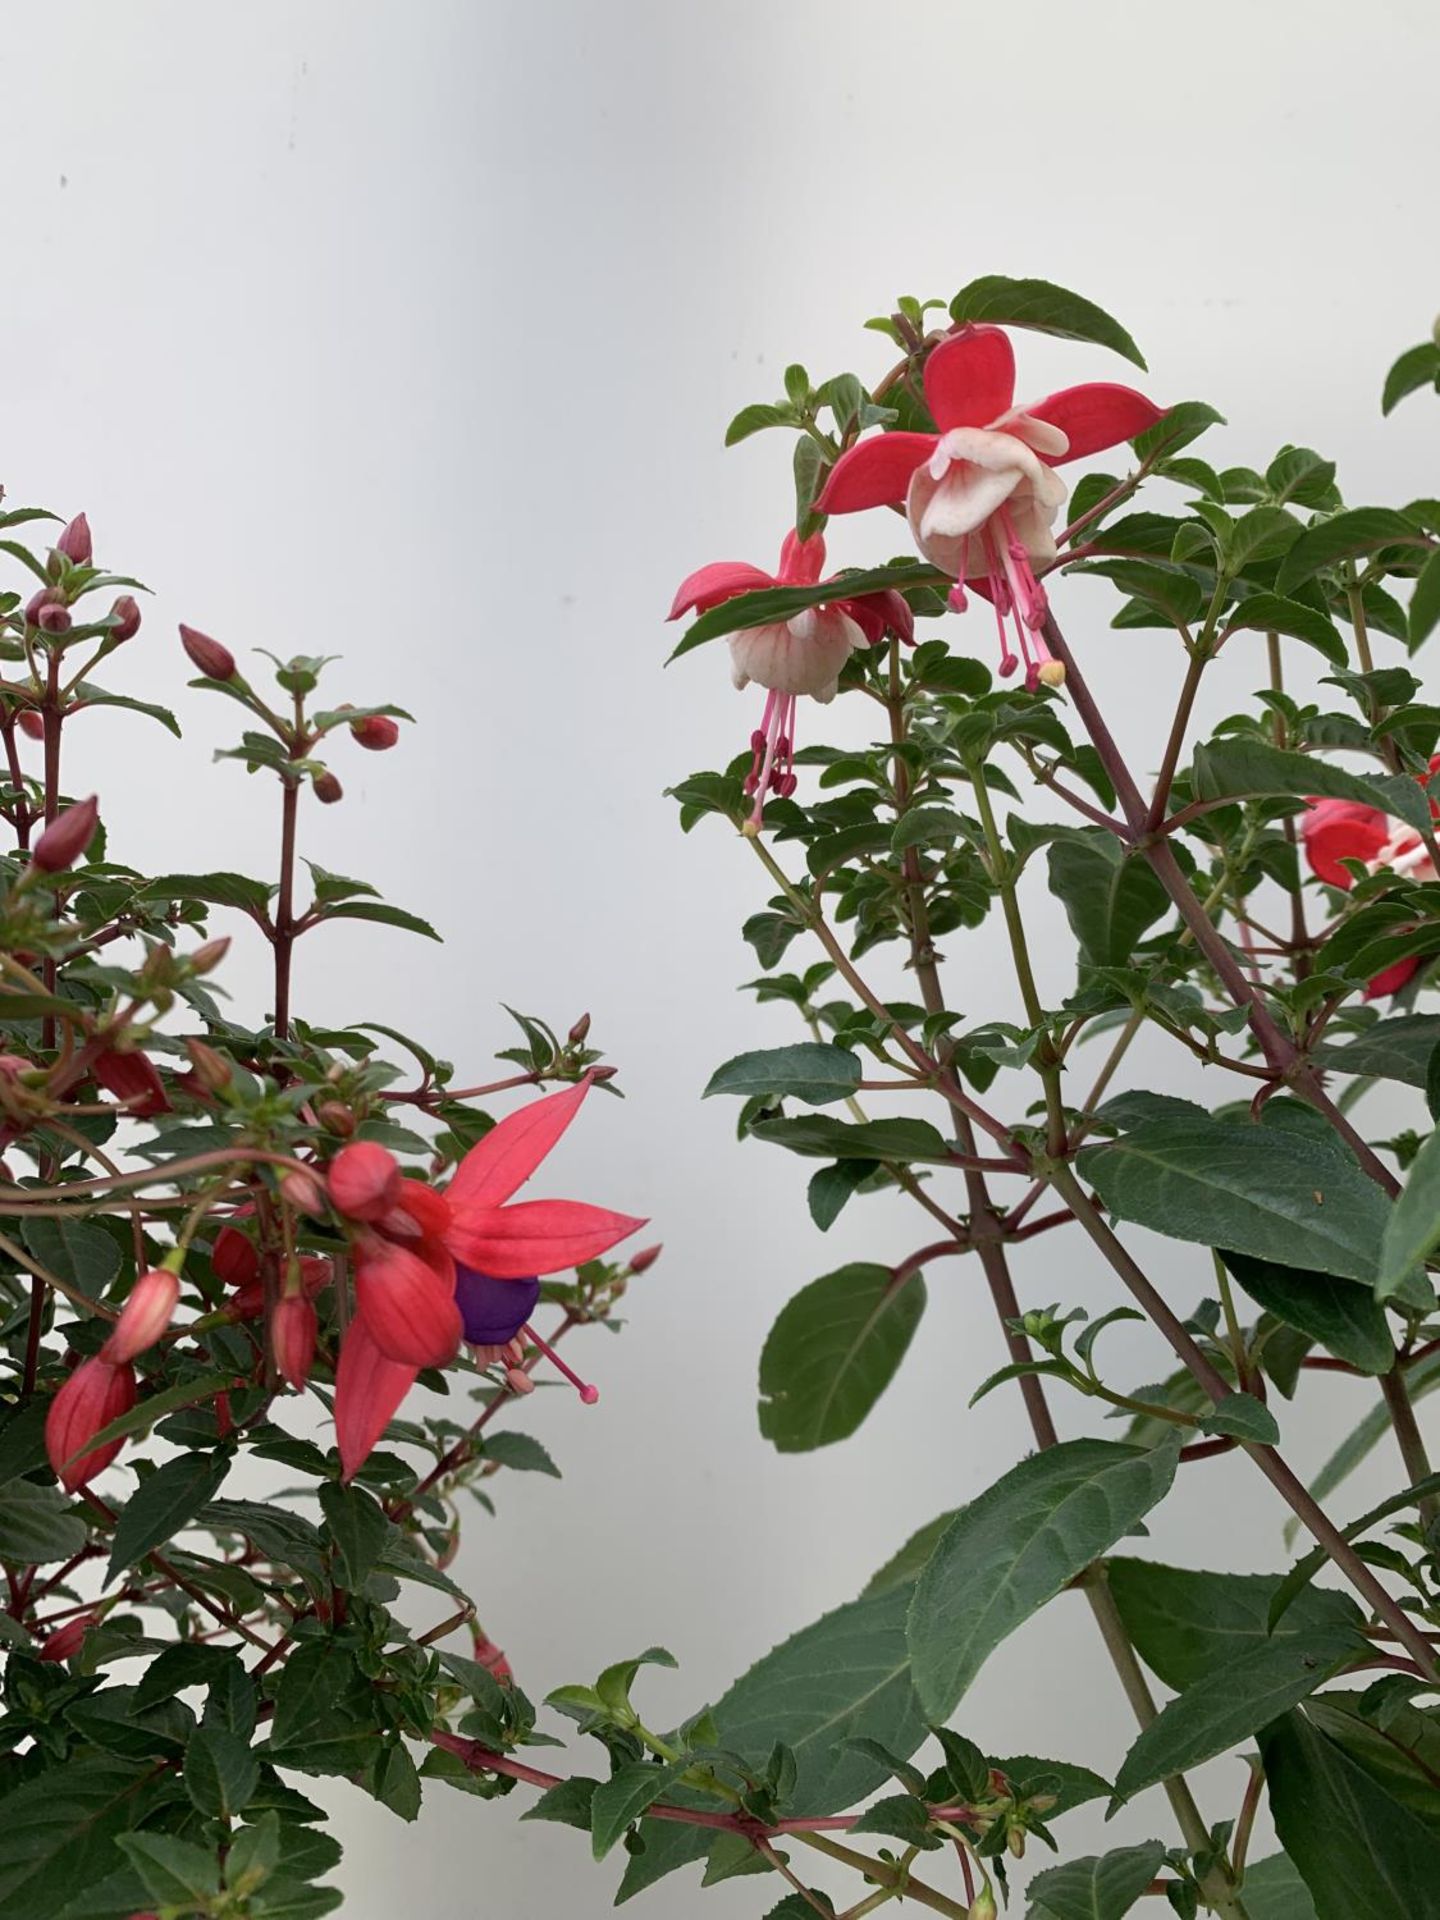 TWO BELLA STANDARD RED/WHITE AND RED/PURPLE FUCHSIA IN A 3 LTR POTS 70CM -80CM TALL TO BE SOLD FOR - Image 3 of 5